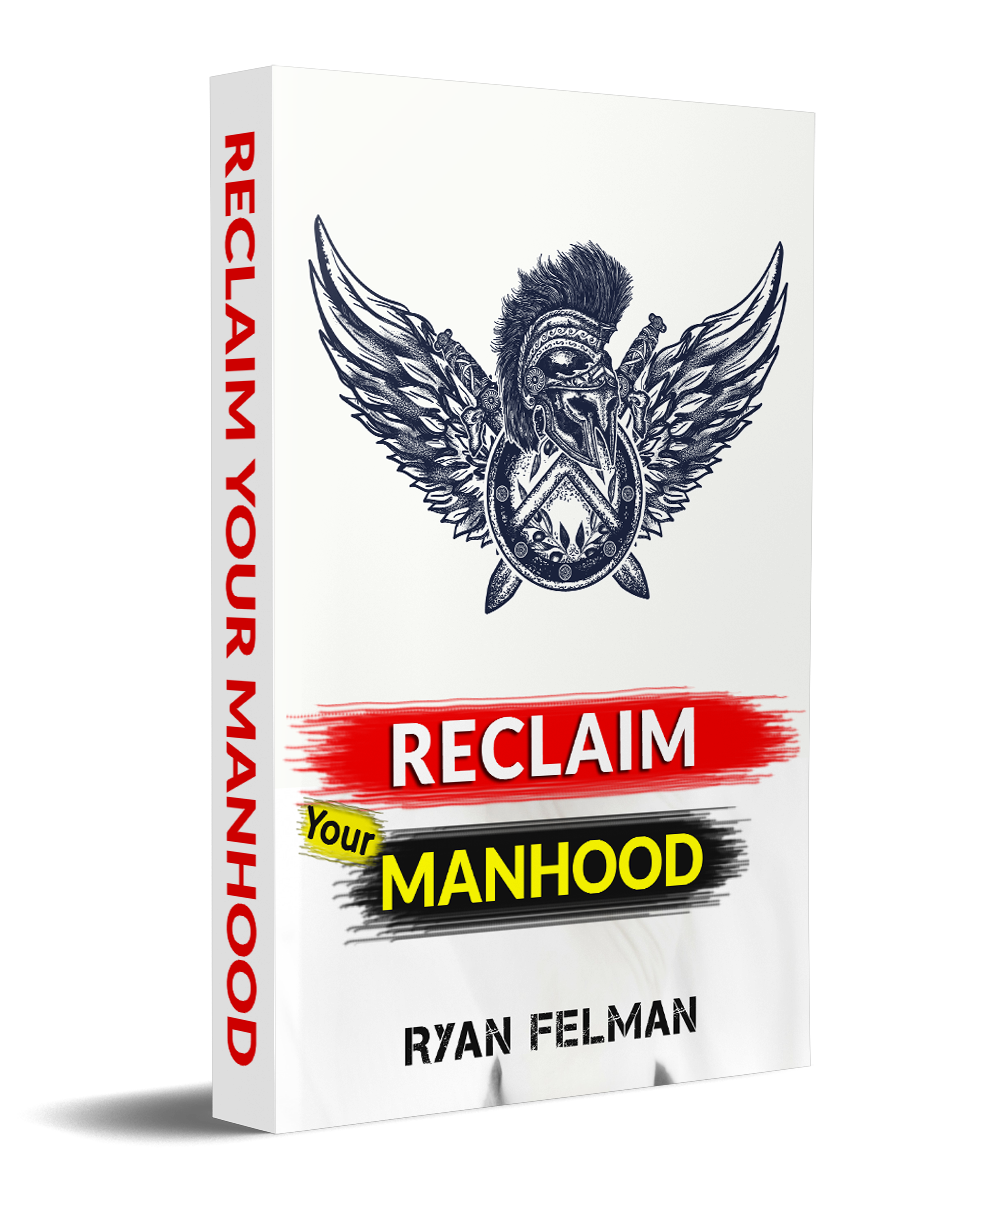 Reclaim Your Manhood PDF — Path To Manliness